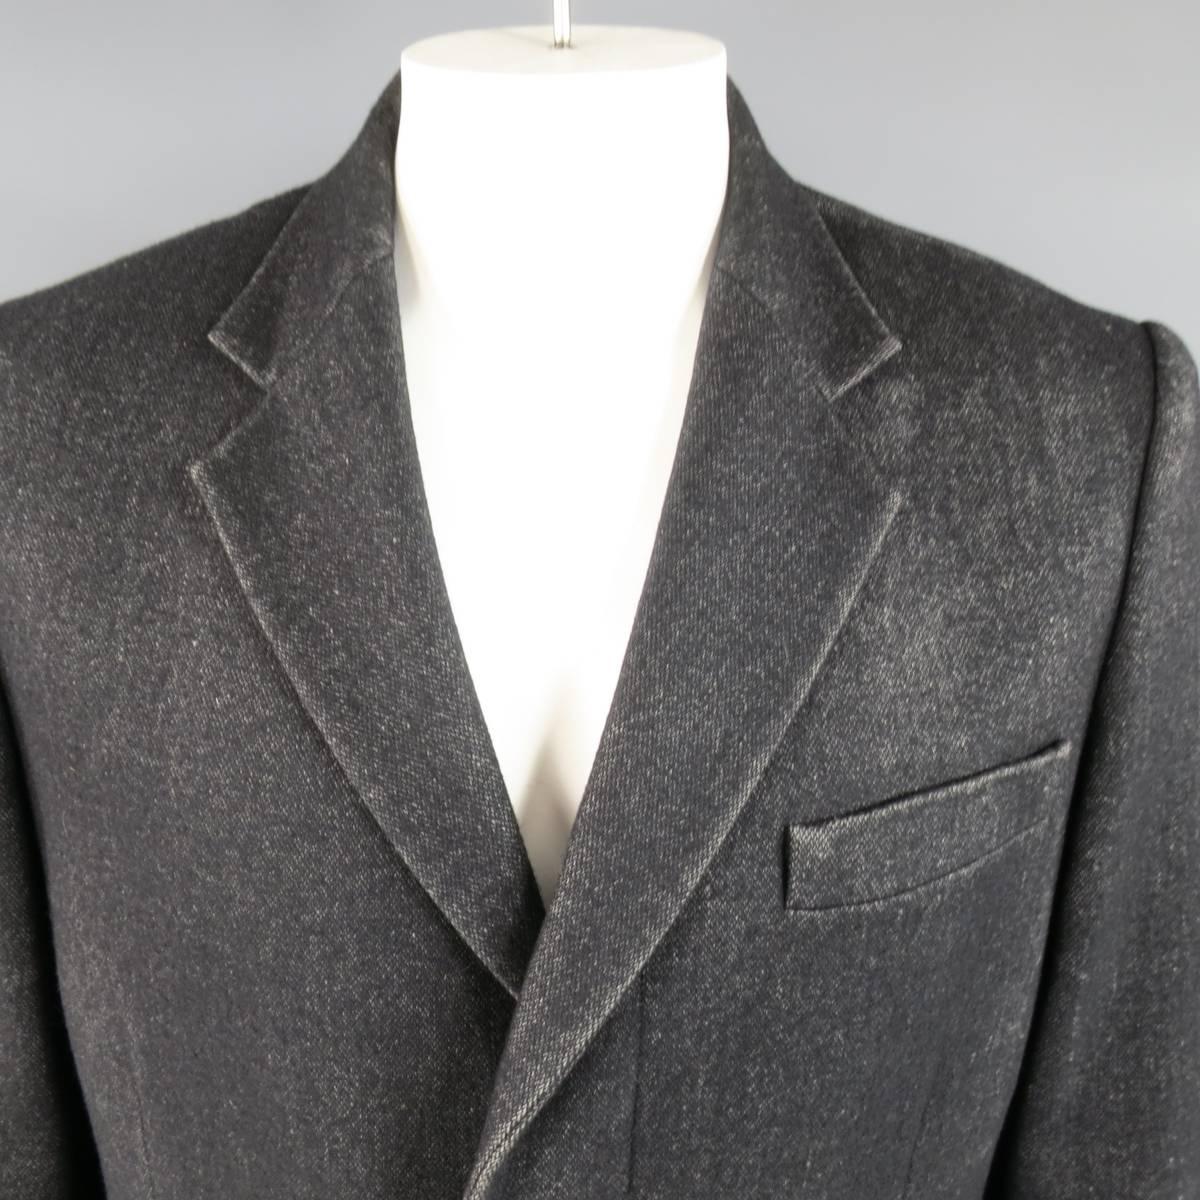 Classic MAISON MARTIN MARGIELA notch lapel coat in a unique black Heather textured wool blend with distressed look qualities throughout featuring a hidden placket button up closure, double flap pockets and single vented back. Made in Italy.
